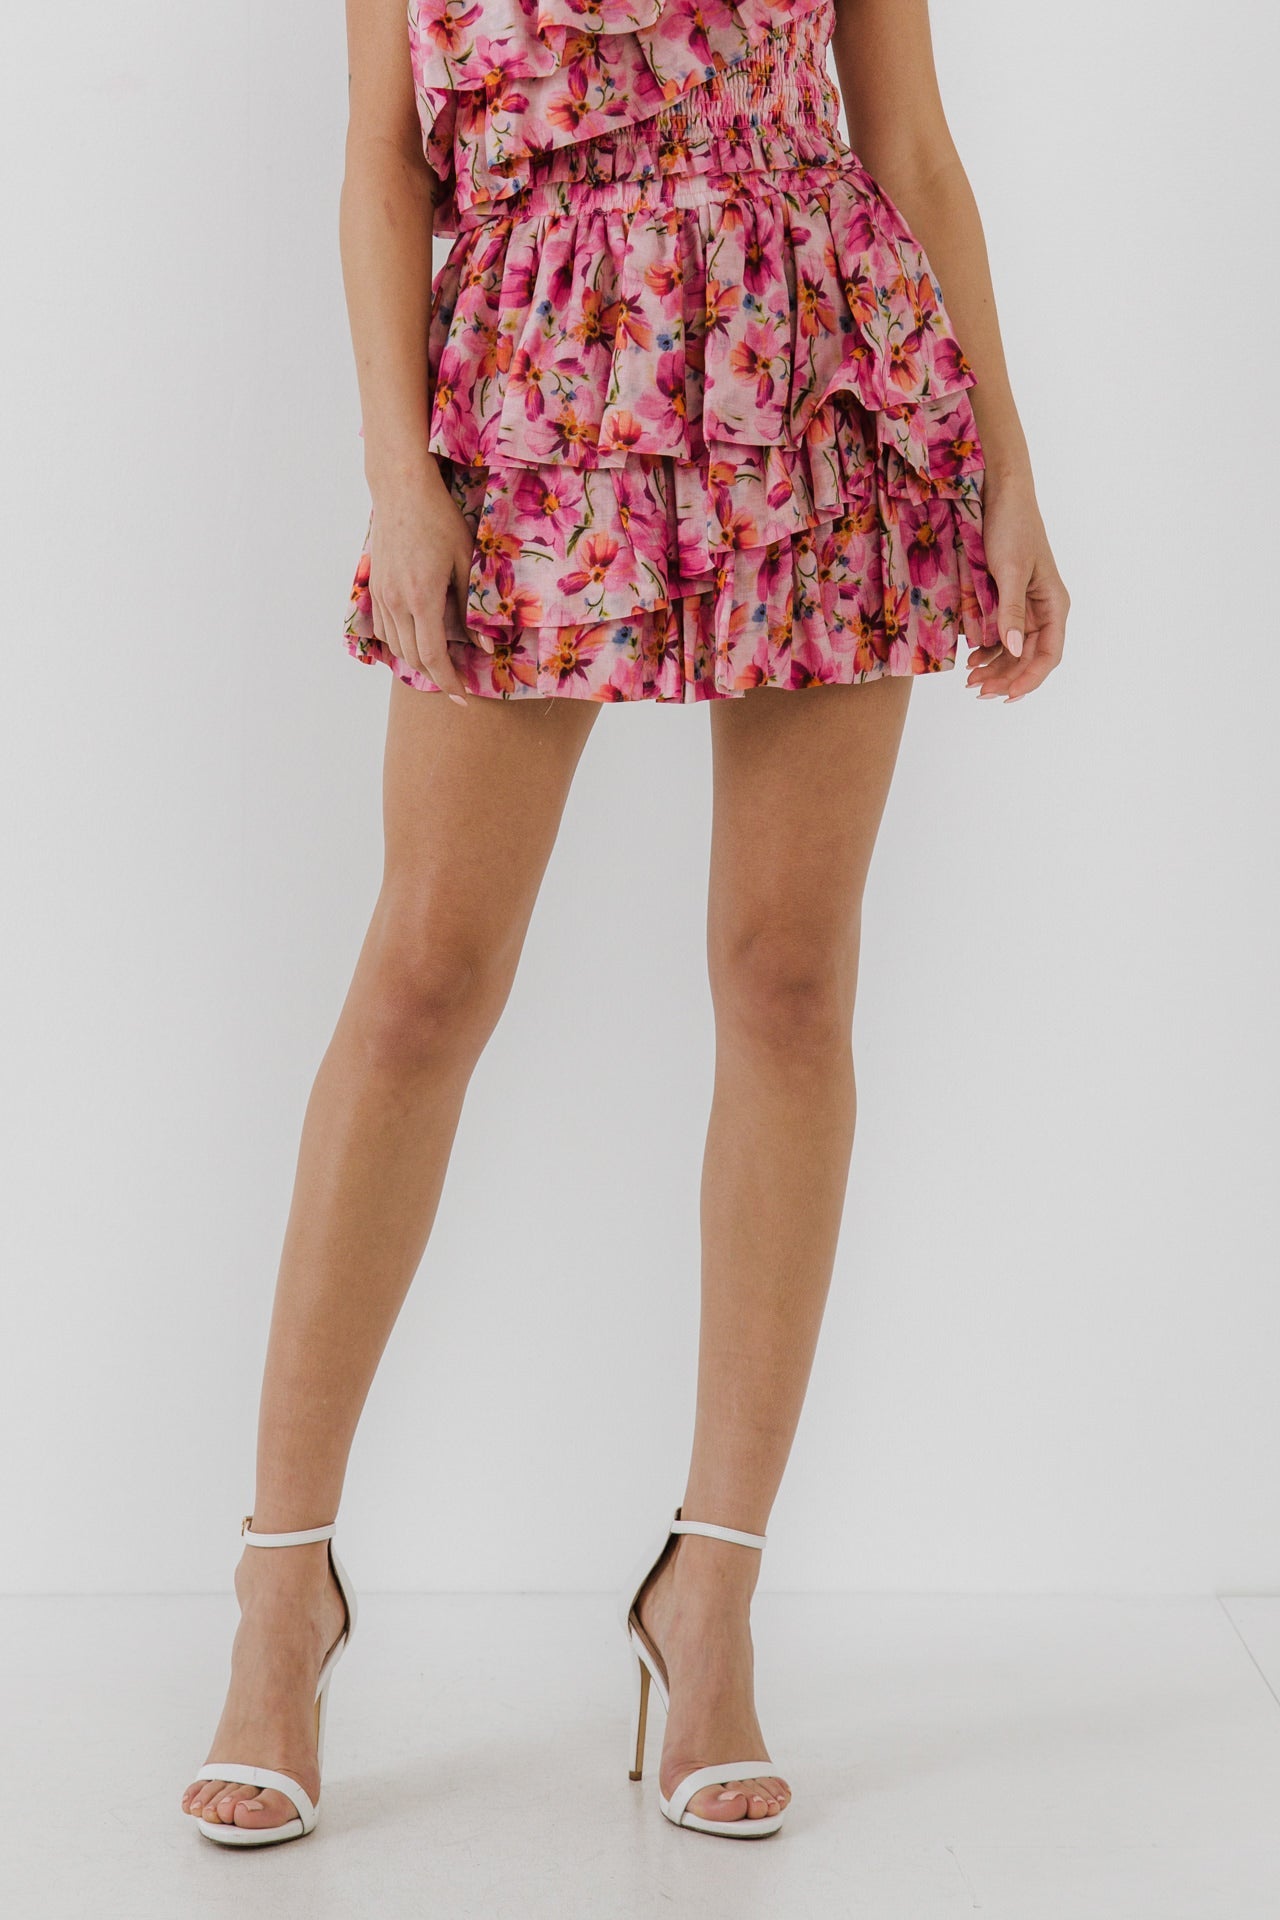 ENDLESS ROSE-Multi Ruffle Floral Mini Skirt-SKIRTS available at Objectrare